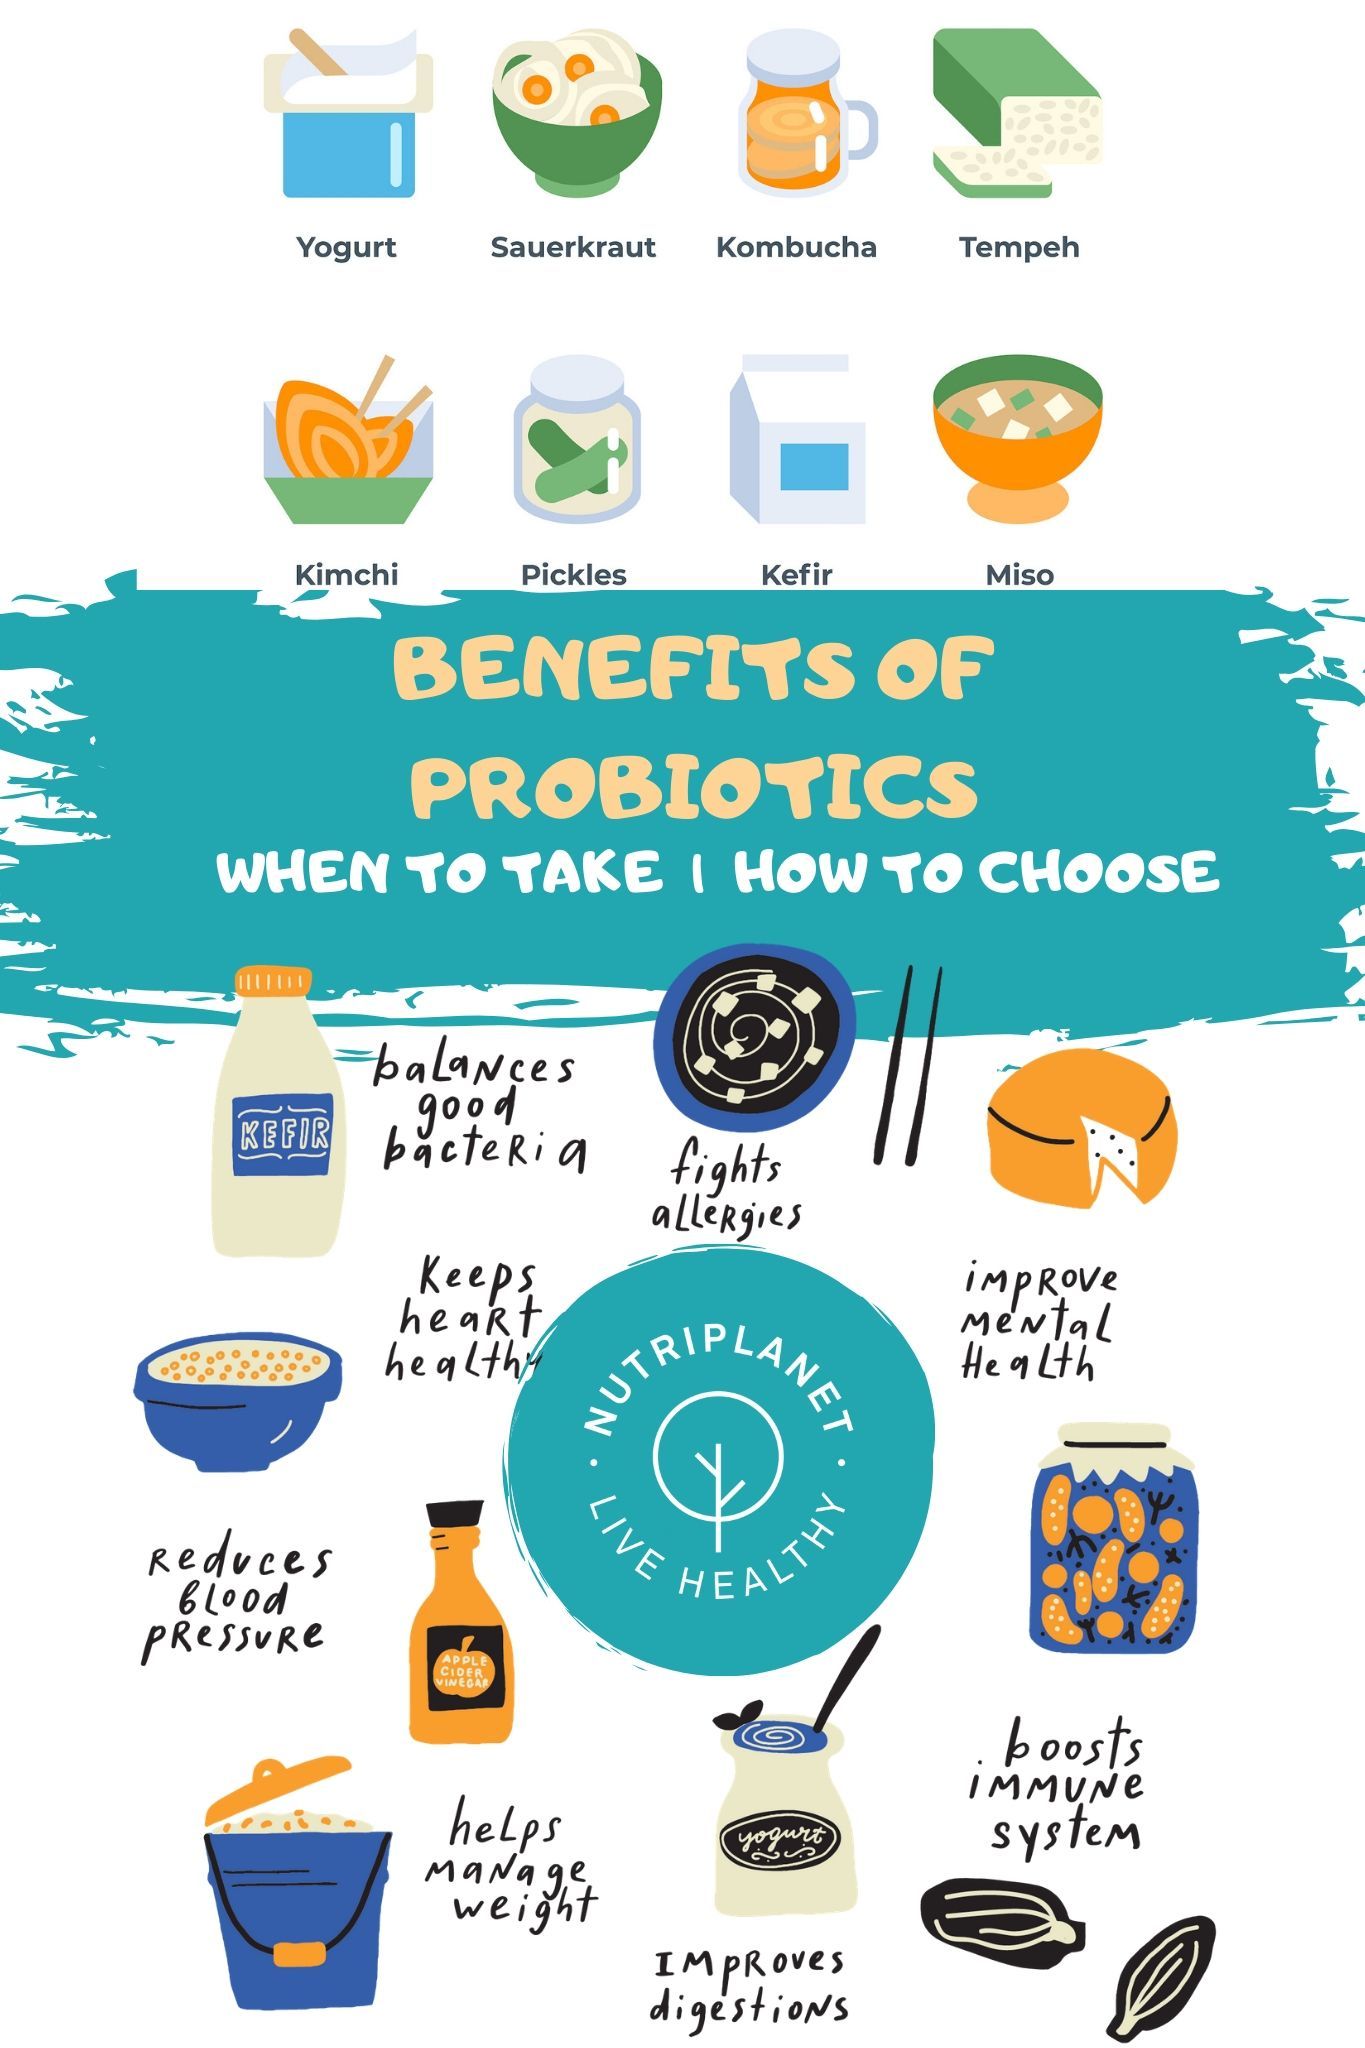 Probiotics: Benefits, How to Choose, When to Take, Safety ...